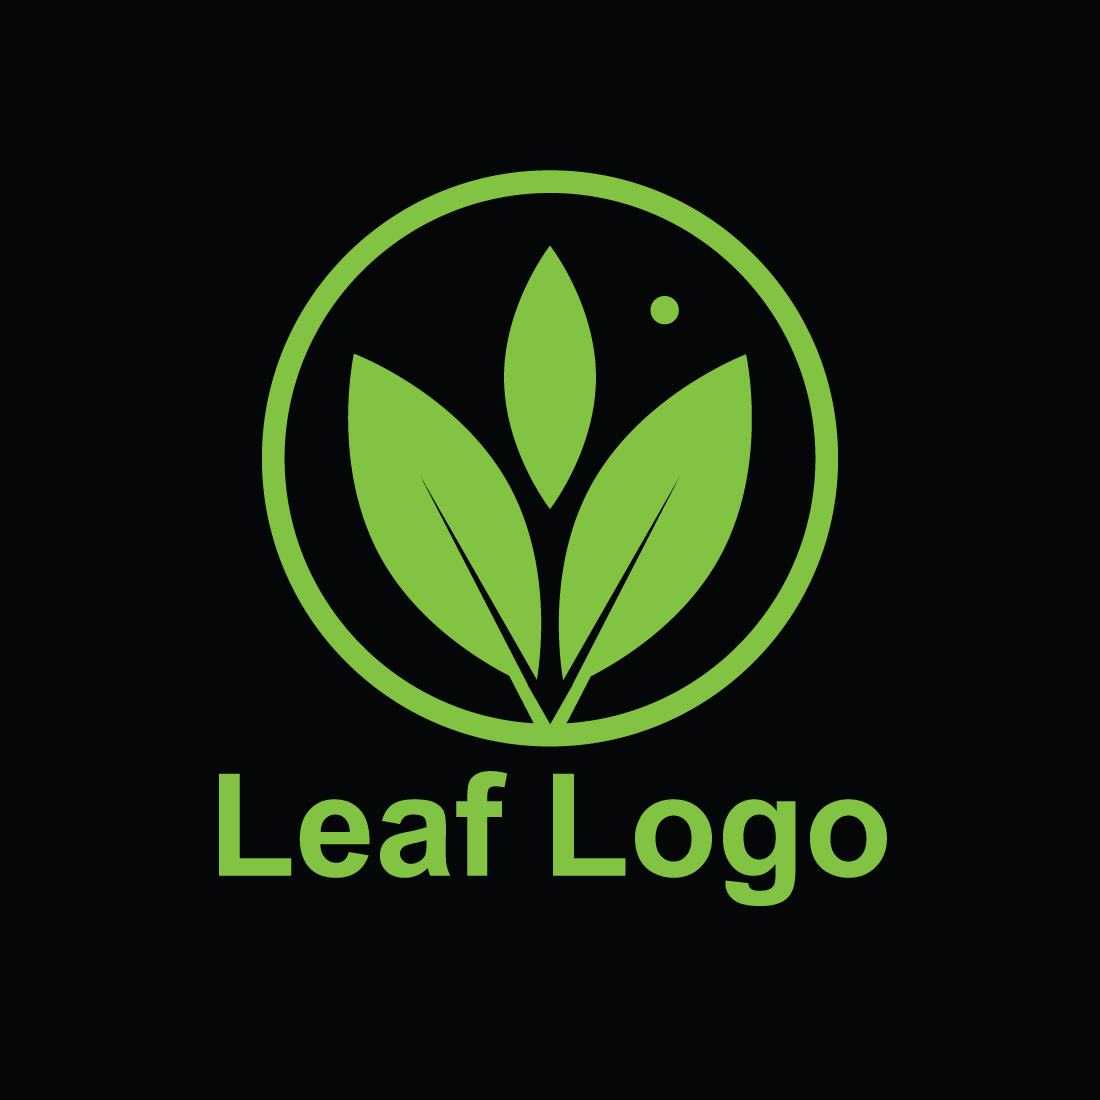 Leaf Logo Stock Photos and Images - 123RF